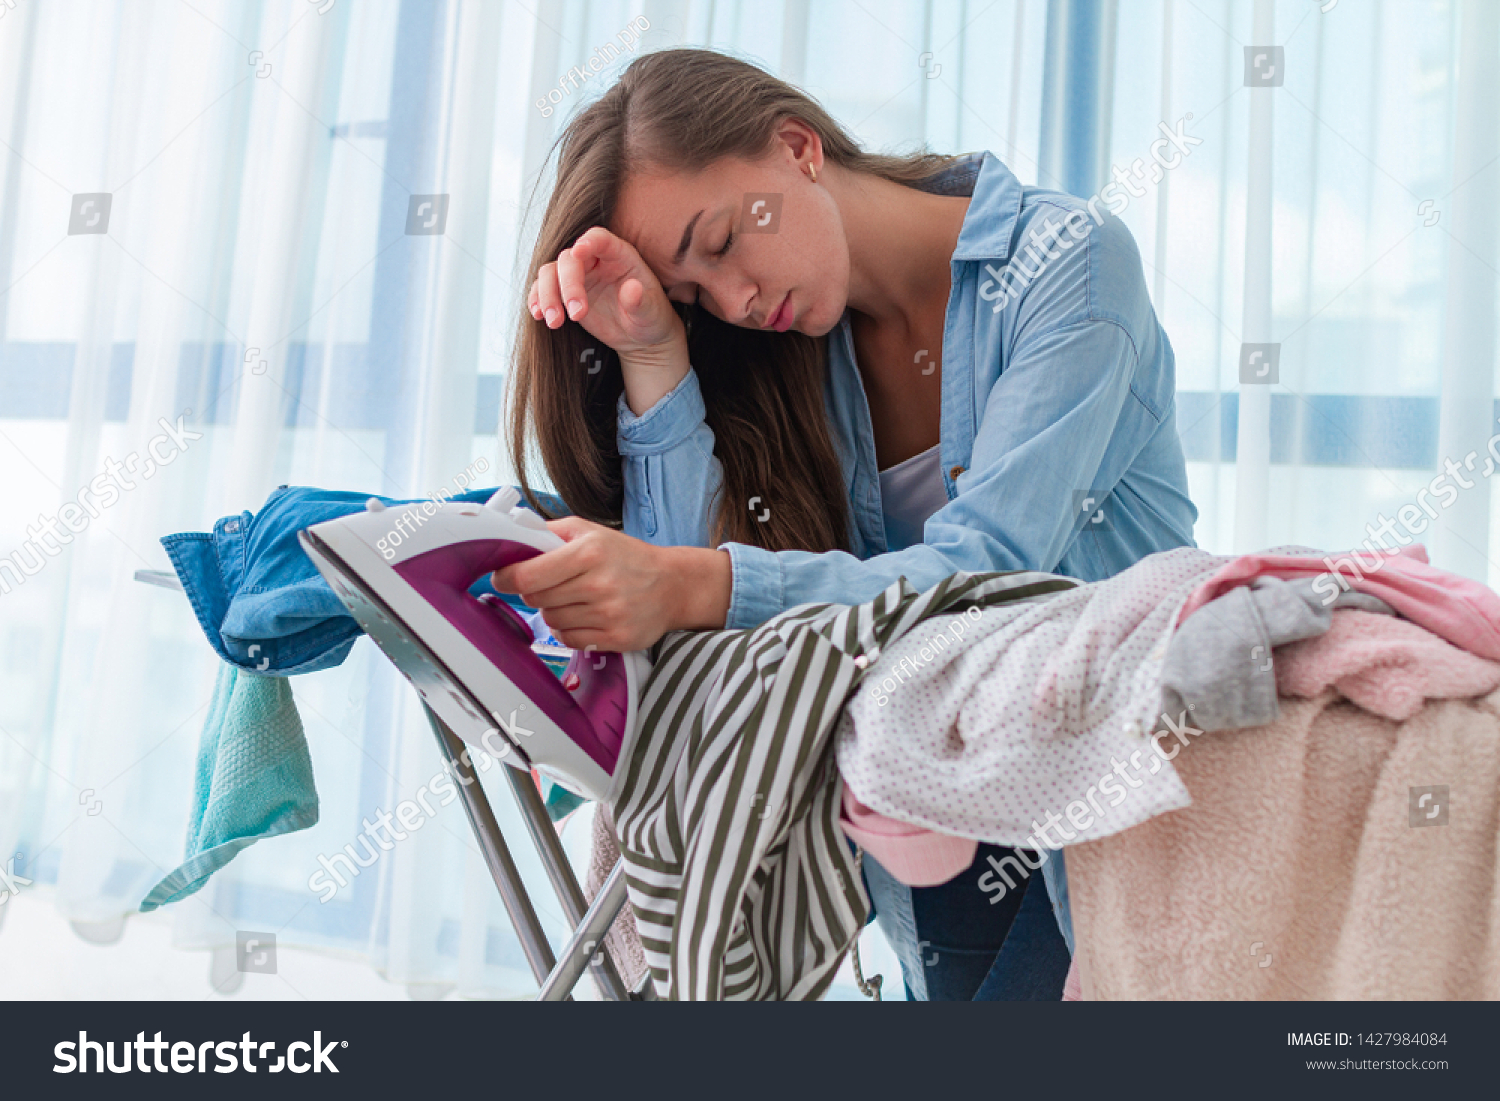 Ironing woman feeling tired from ironing pile of clothes after laundry at home. Household chores and routine #1427984084